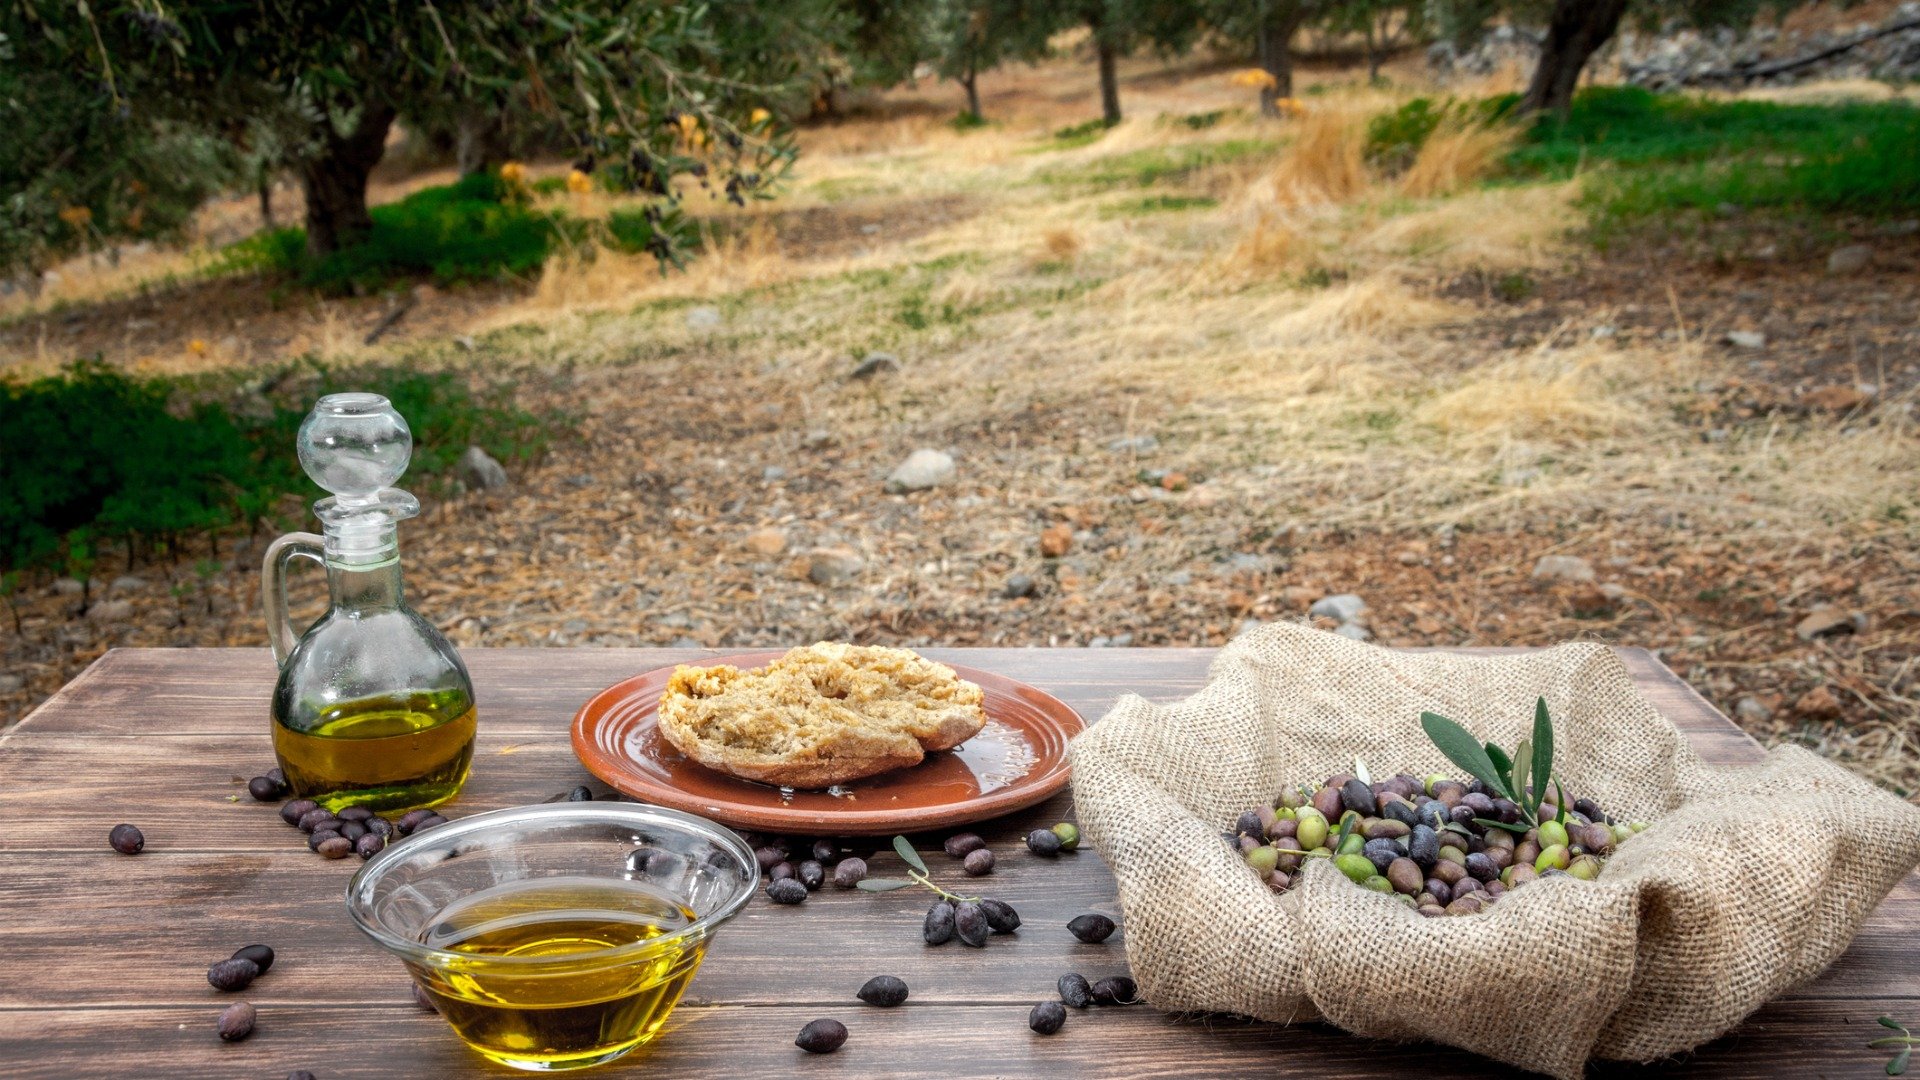 This image shows a table set in nature. There's a bottle of olive oil, a Cretan rusk and some olives on the table. 